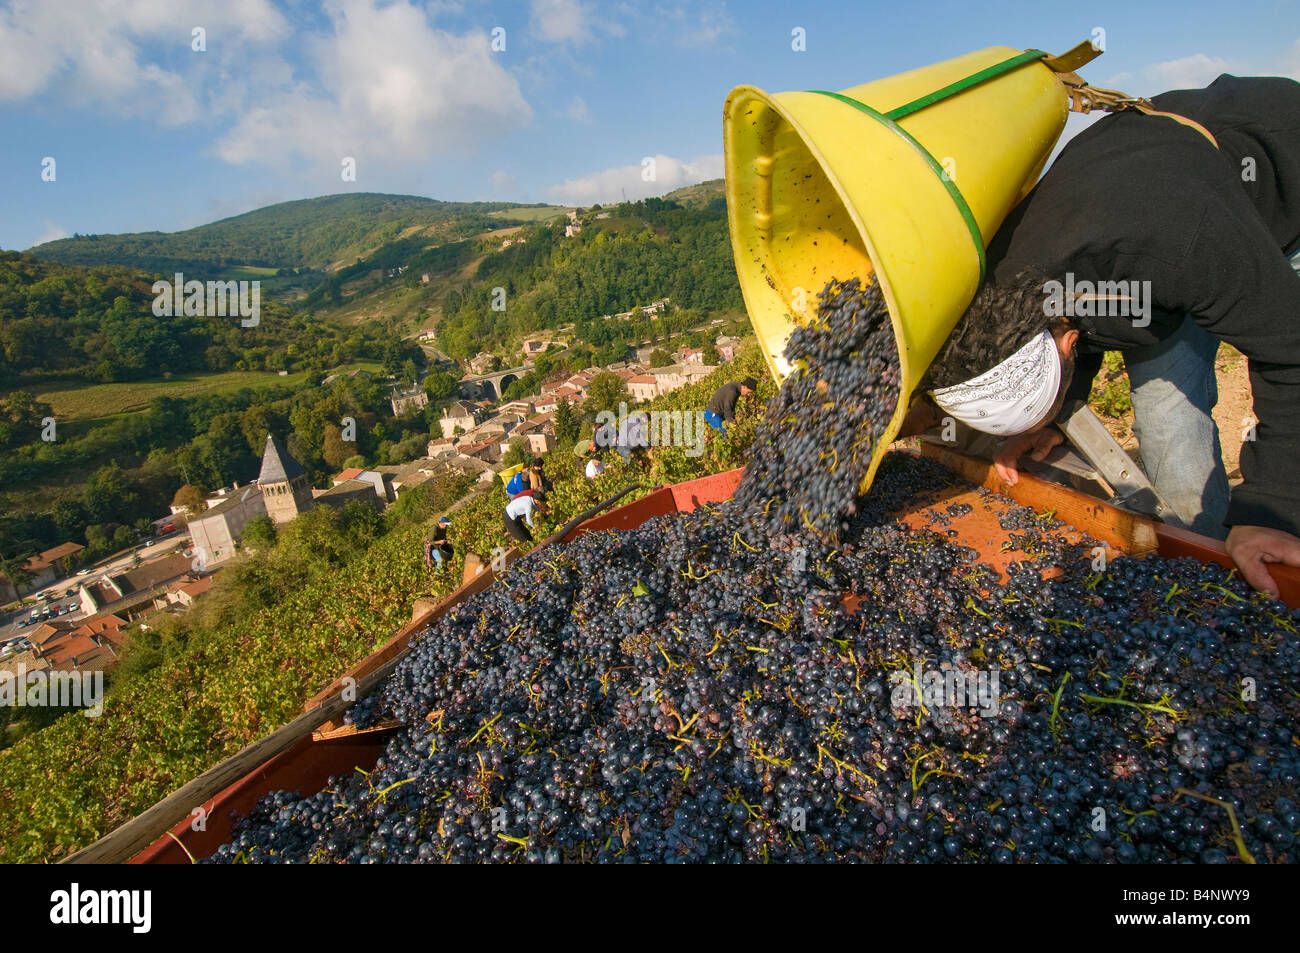 The harvester unloads its back-basket  full of bunch of grapes on the sorting table, near Beaujeu, Beaujolais, France Stock Photo